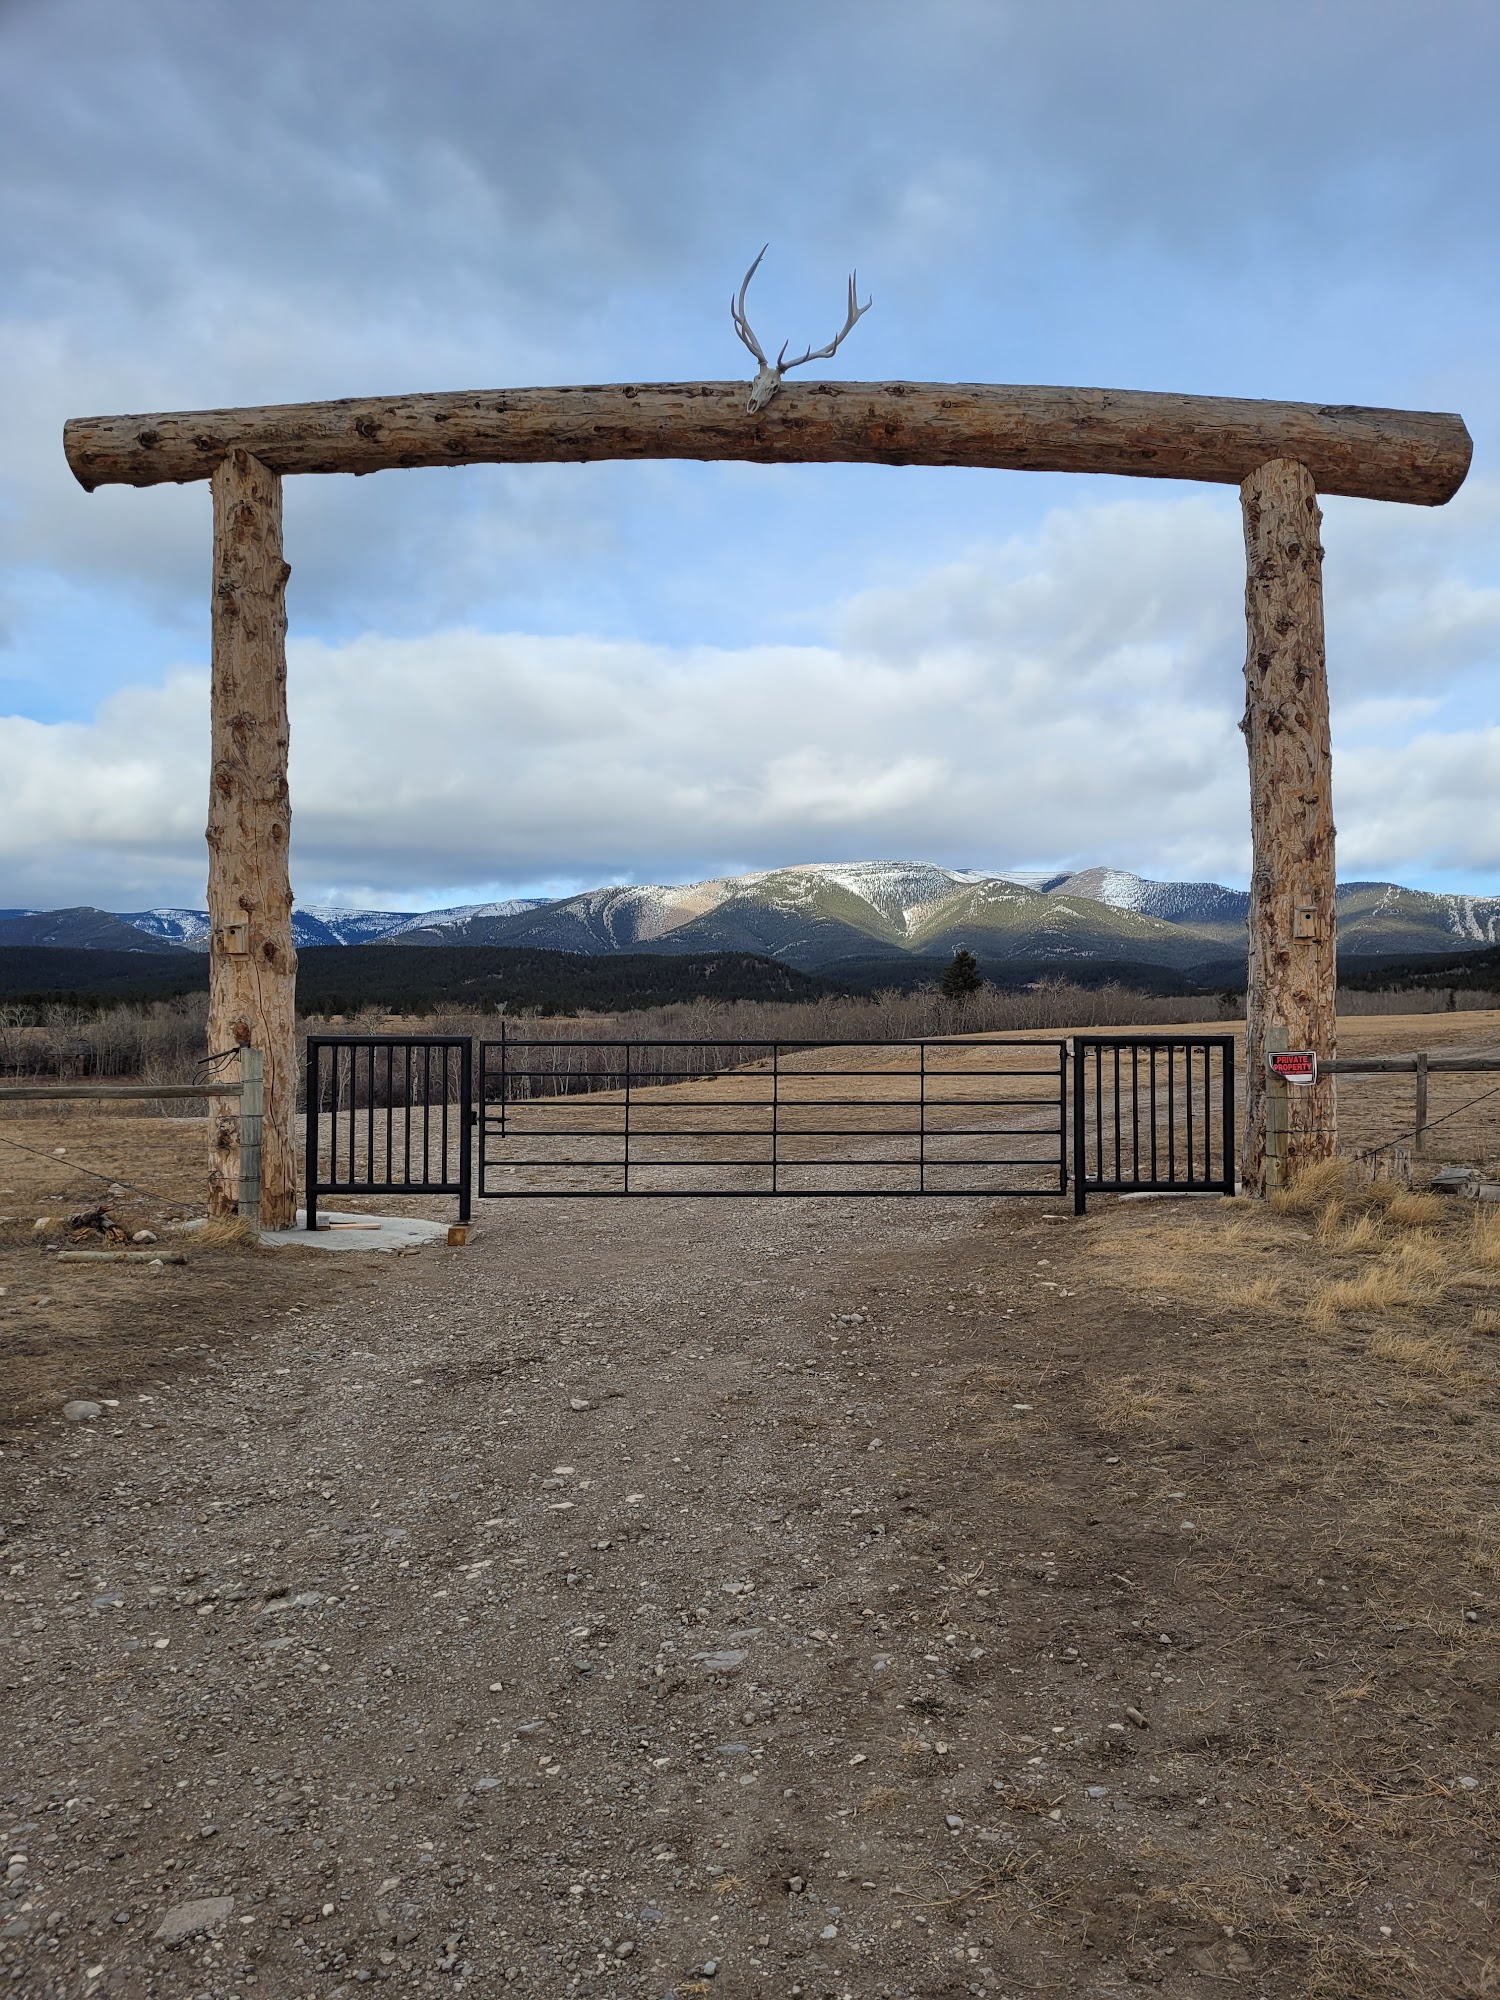 Bull Mountain Fencing and Supply